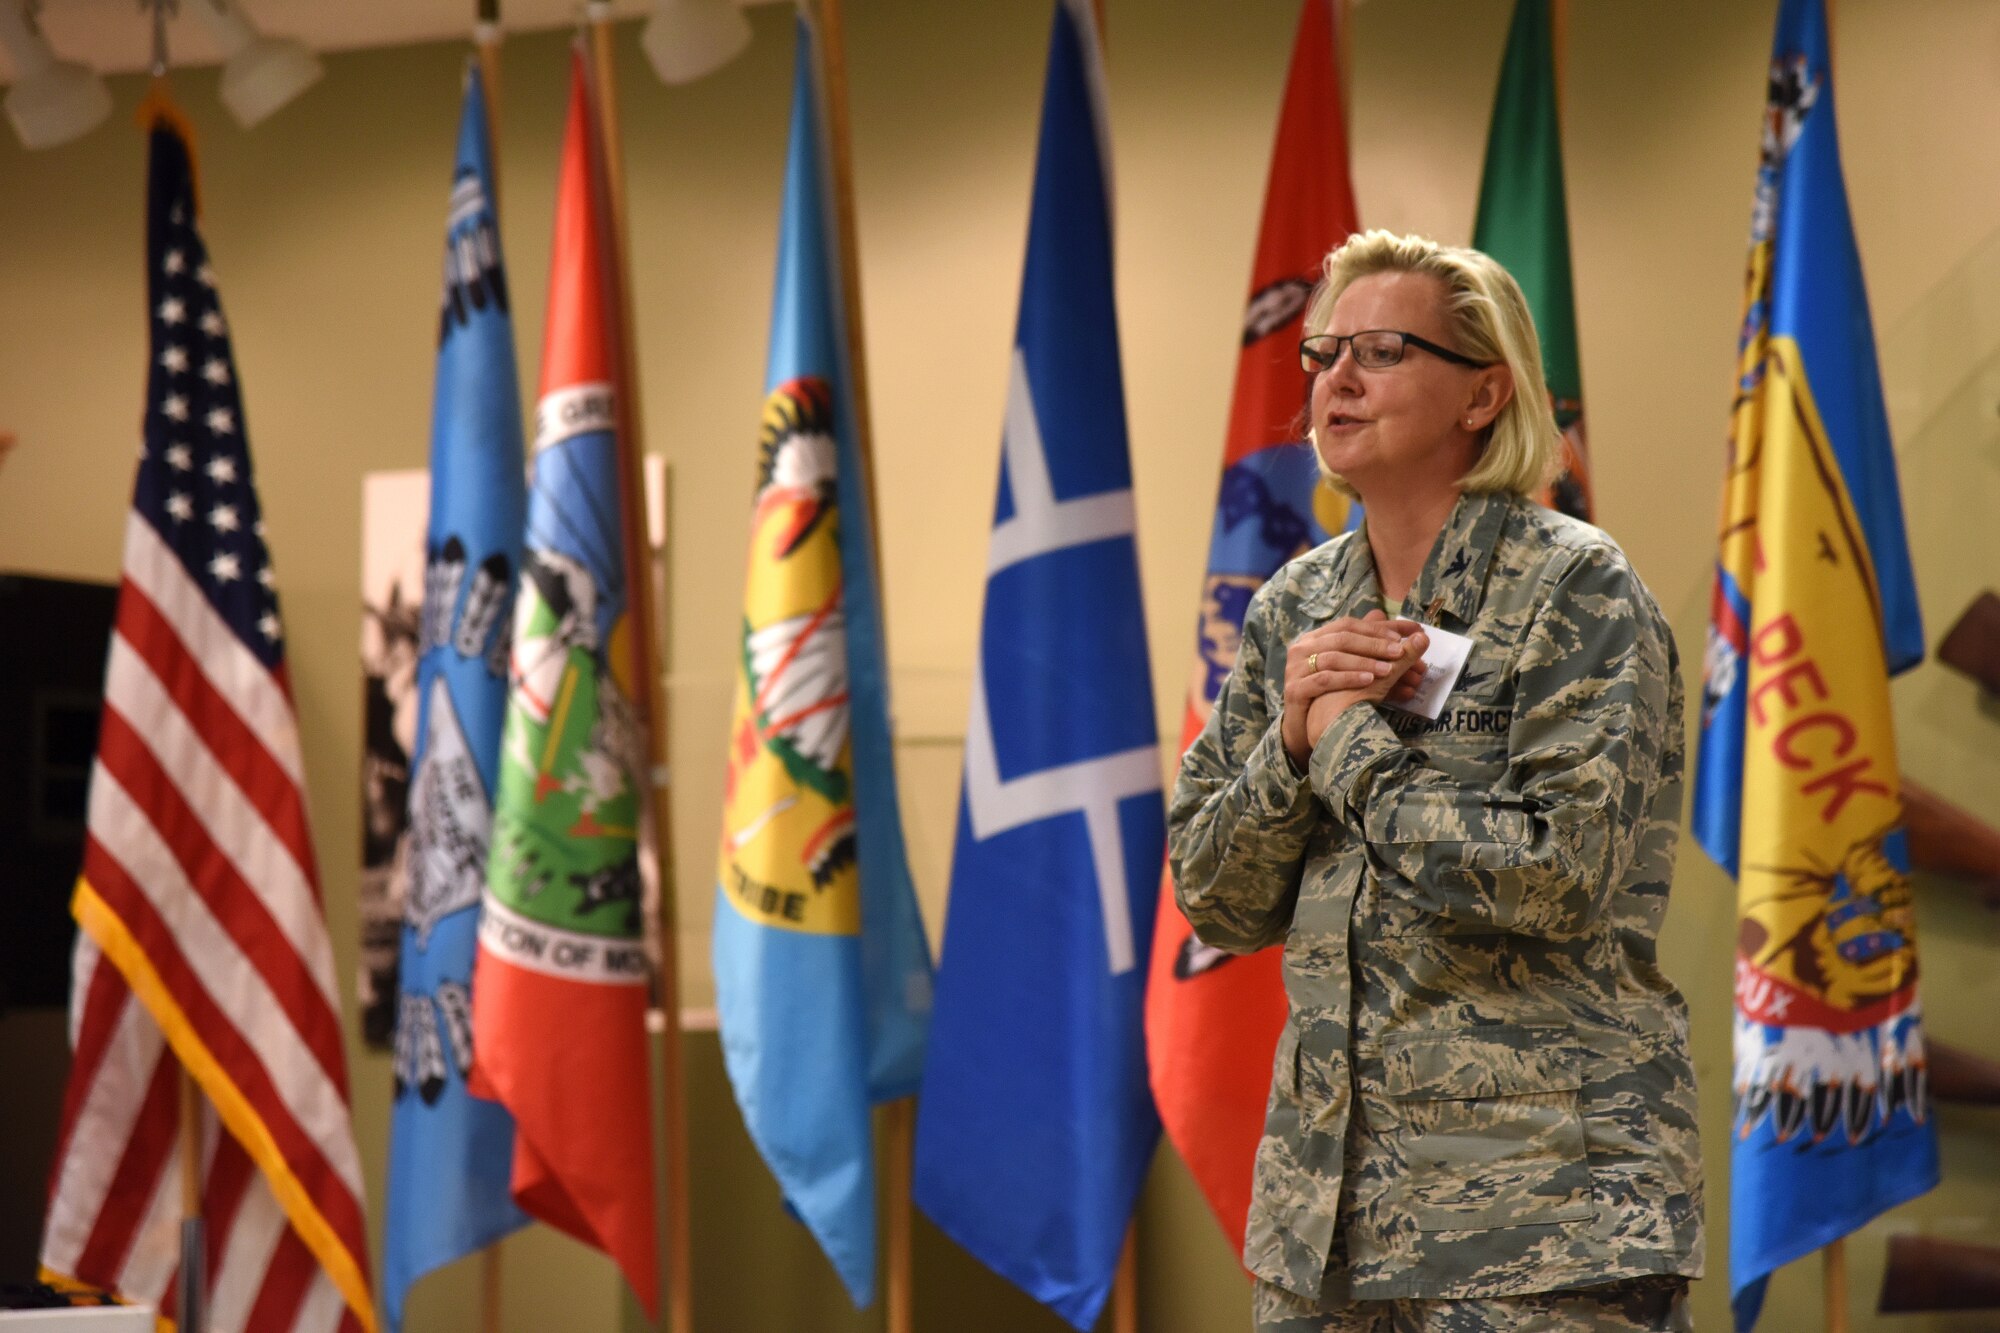 180712-F-UQ541-1151 Col. Jennifer Reeves, 341st Missile Wing commander, welcomes Native American tribal representatives from the state of Montana at the C.M. Russell Museum for the third annual tribal relations meeting July 12, 2018, in Great Falls, Mont. Participants included tribal, cultural and government leaders as well as Malmstrom, U.S. Forest Service and Montana National Guard representatives. (U.S. Air Force photo by Kiersten McCutchan)